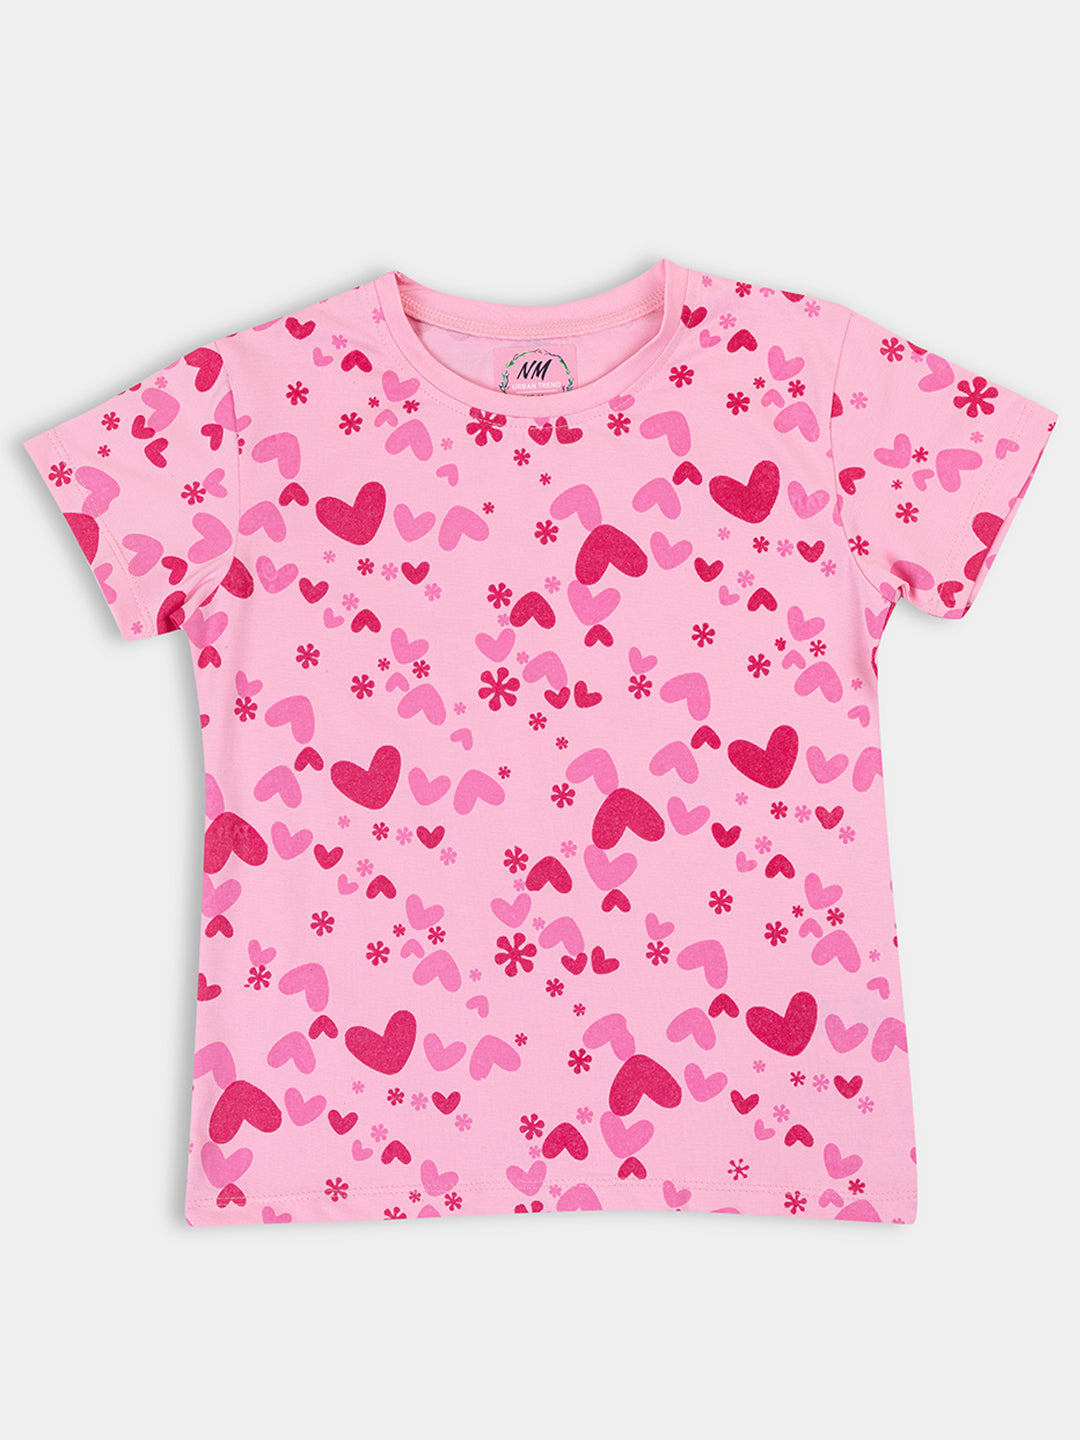 Stylish Printed Stretchable Tops Pack of 3 for Girls